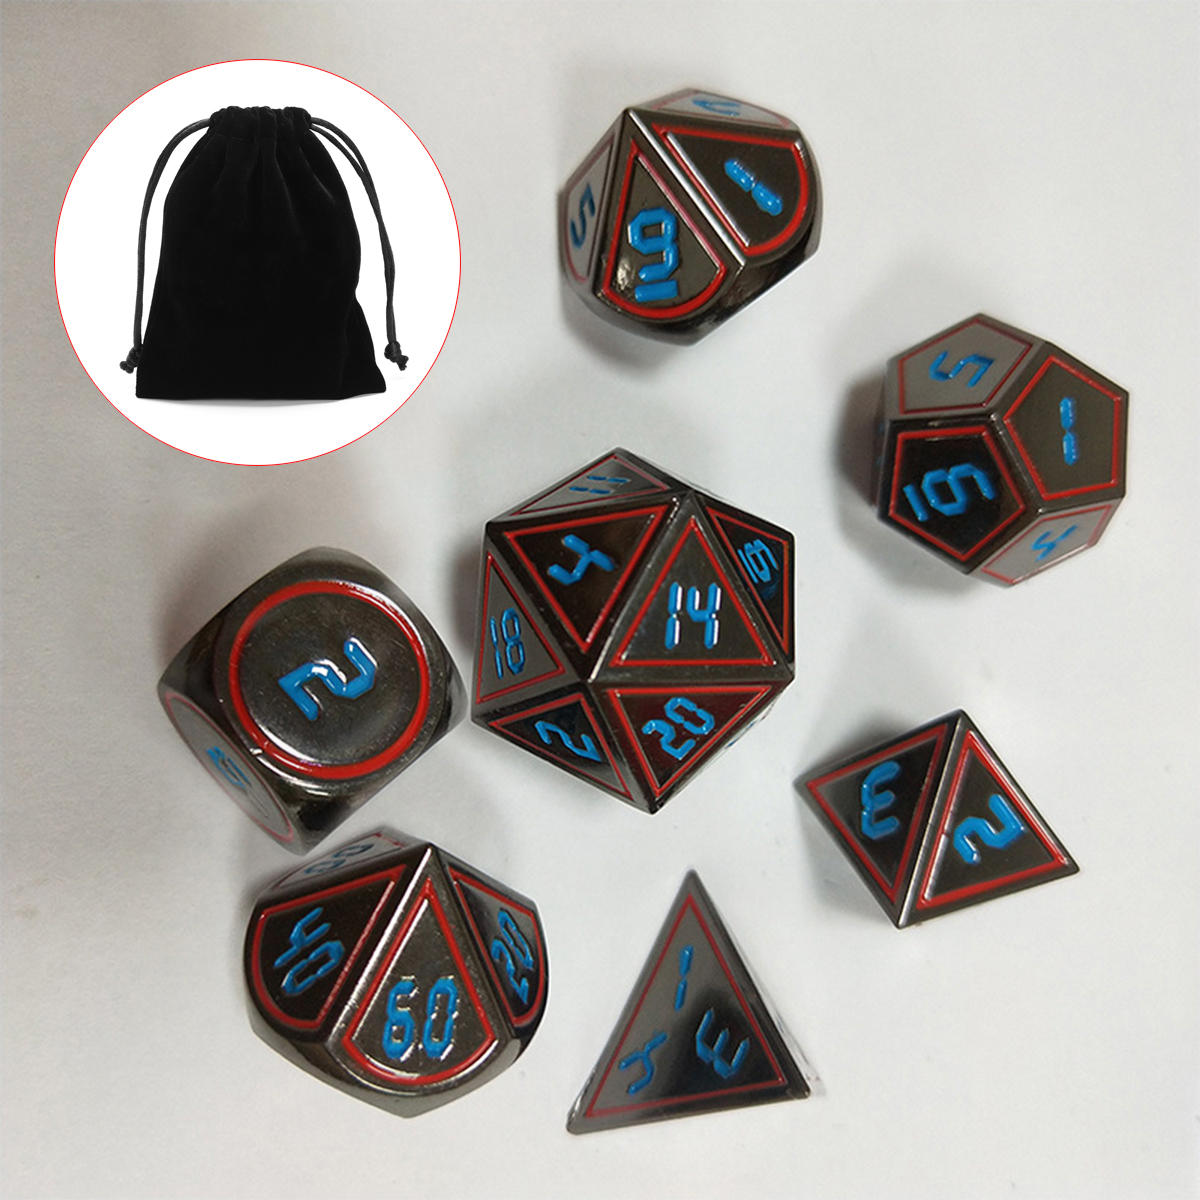 Antique Metal Polyhedral Dice DND RPG MTG Role Playing Game With Bag 7Pcs/set 